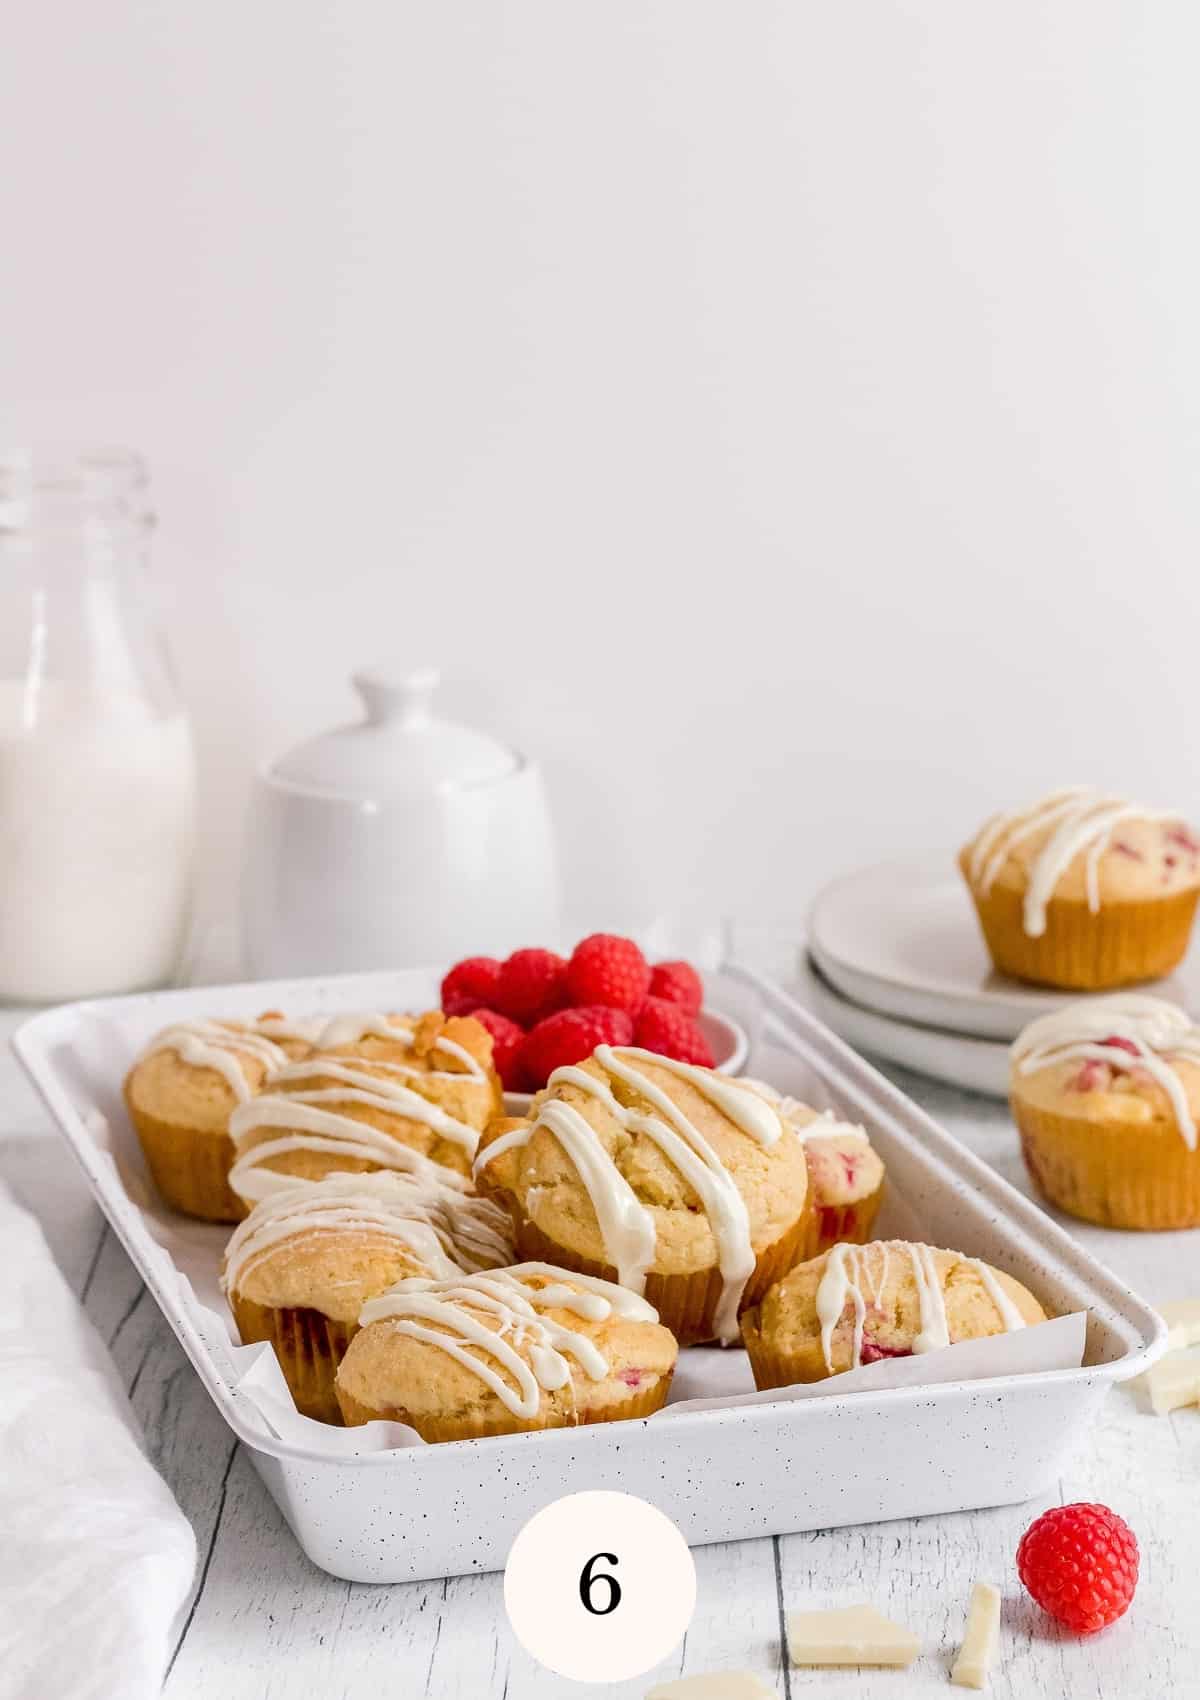 muffins with white chocolate drizzle